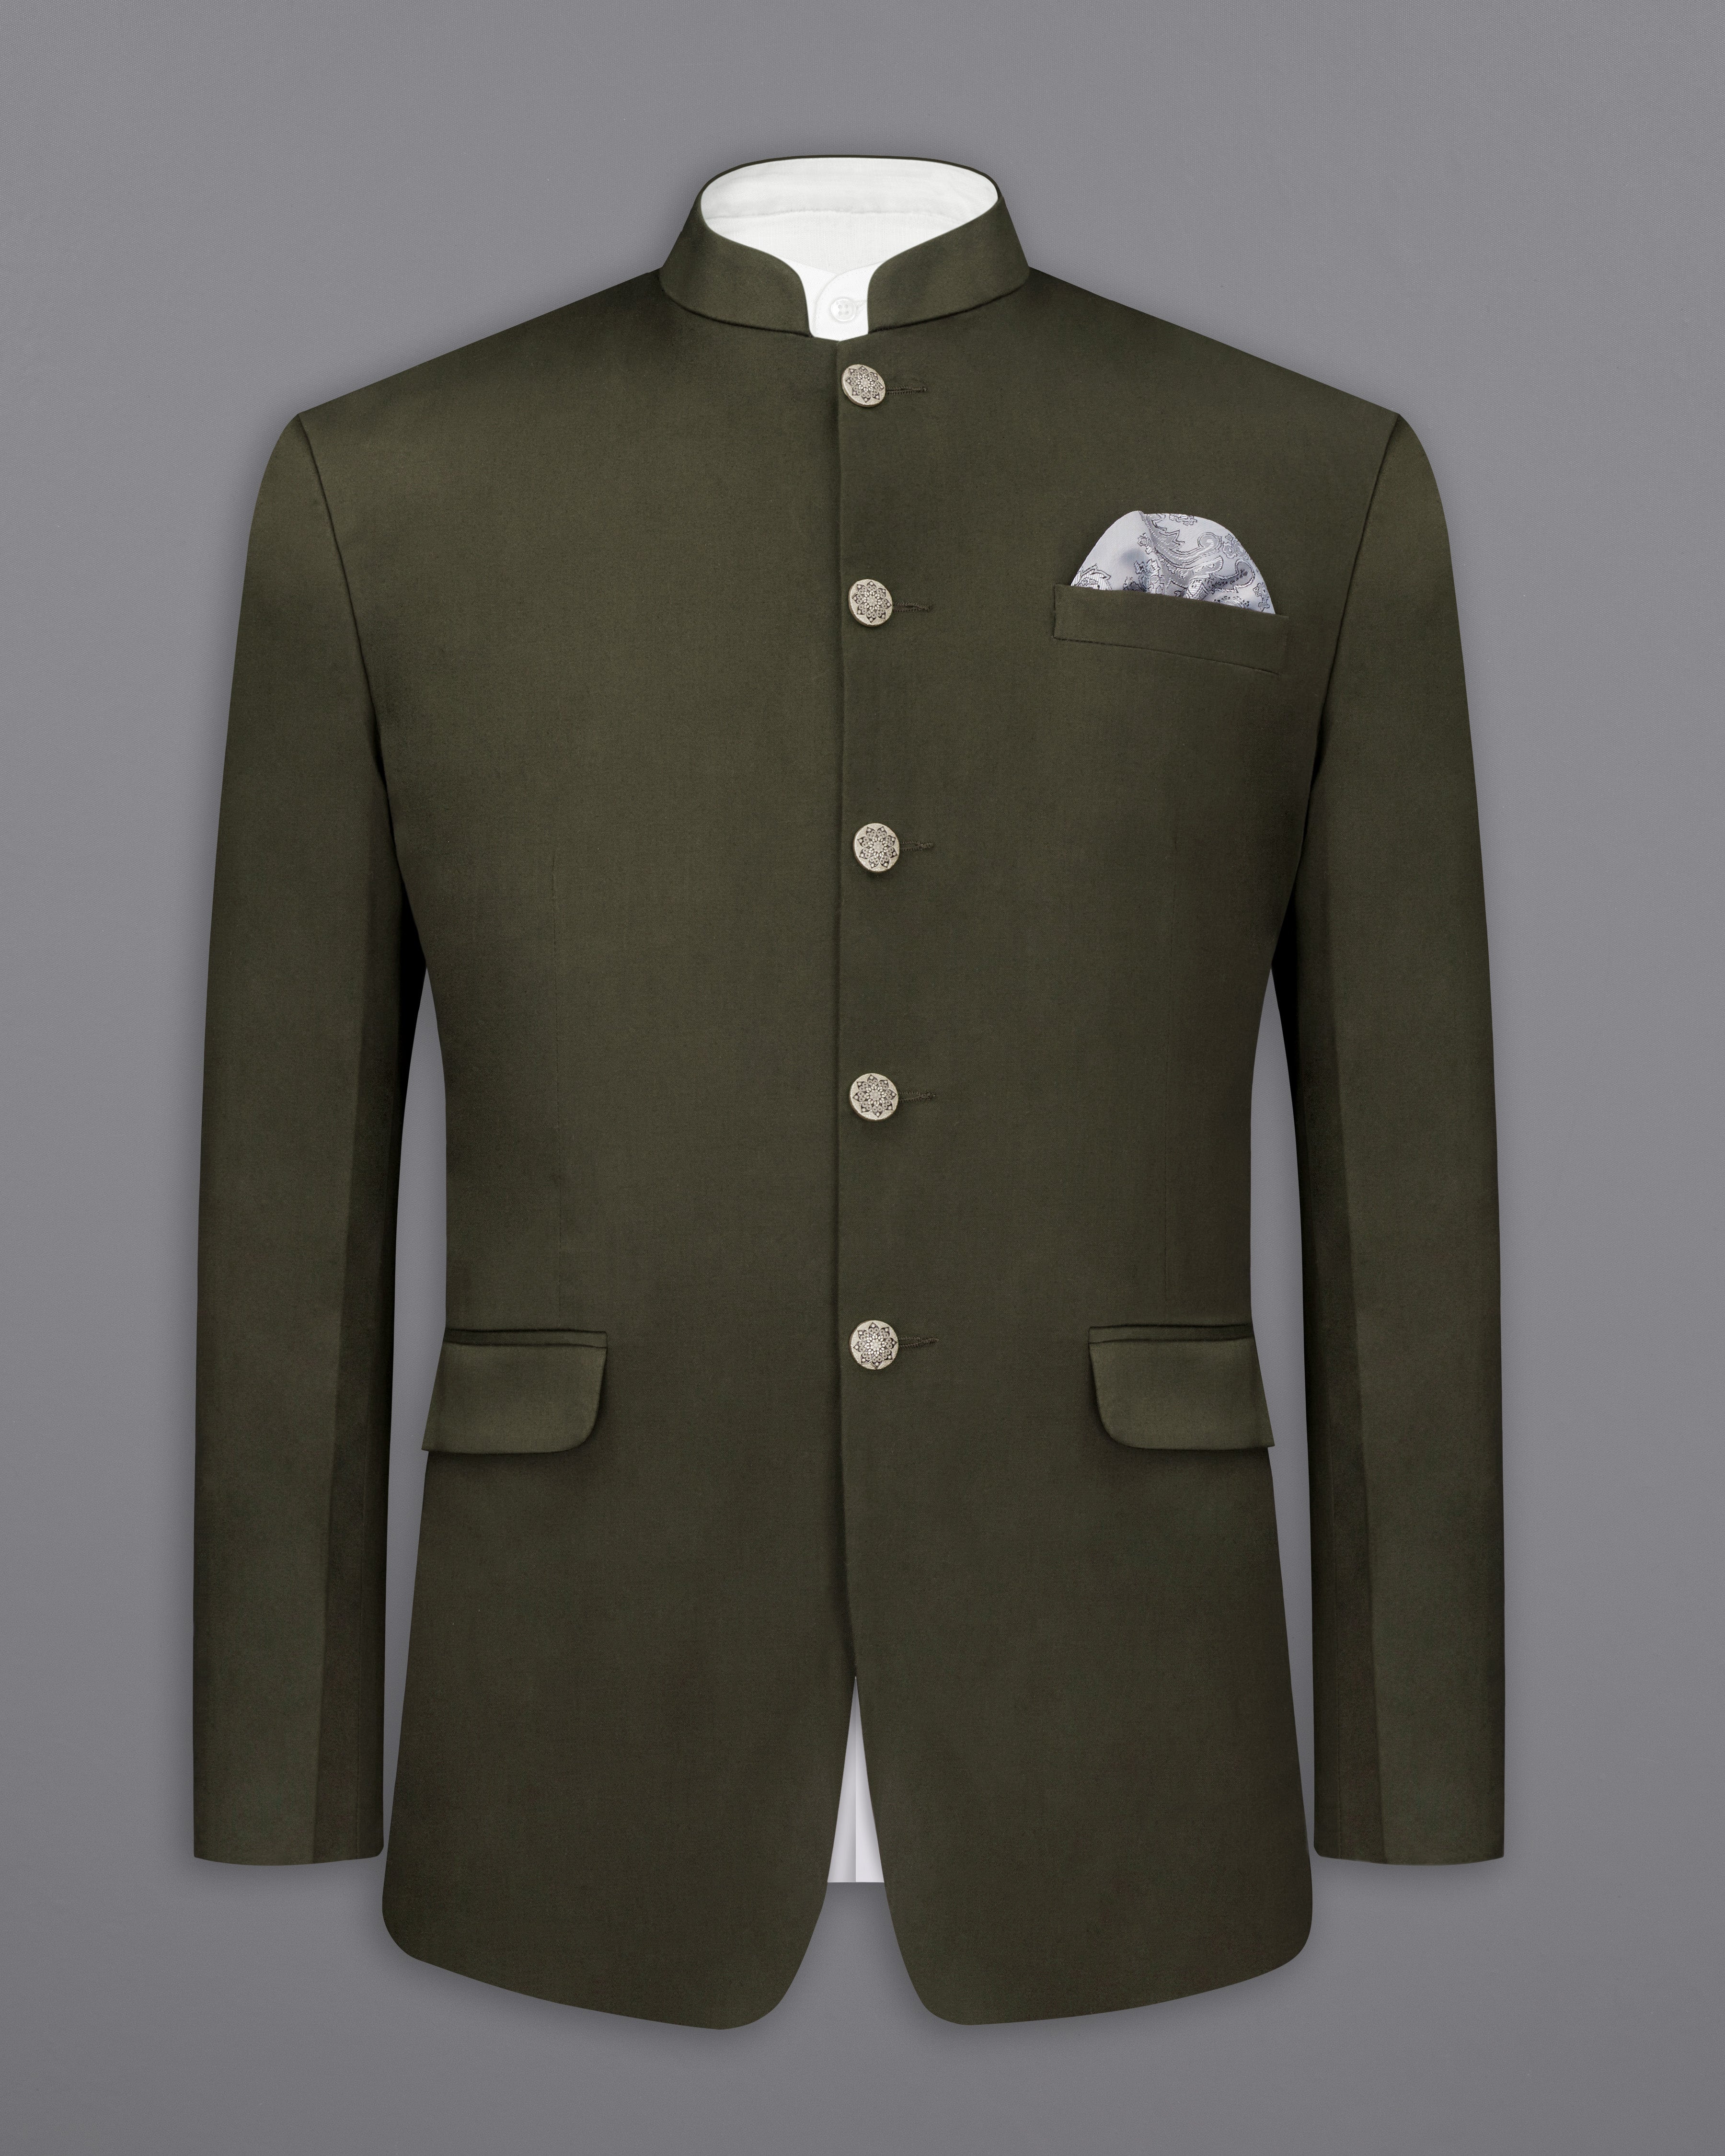 Taupe Green Solid Stretchable Premium Cotton Bandhgala Traveler Suit ST2644-BG-36, ST2644-BG-38, ST2644-BG-40, ST2644-BG-42, ST2644-BG-44, ST2644-BG-46, ST2644-BG-48, ST2644-BG-50, ST2644-BG-52, ST2644-BG-54, ST2644-BG-56, ST2644-BG-58, ST2644-BG-60